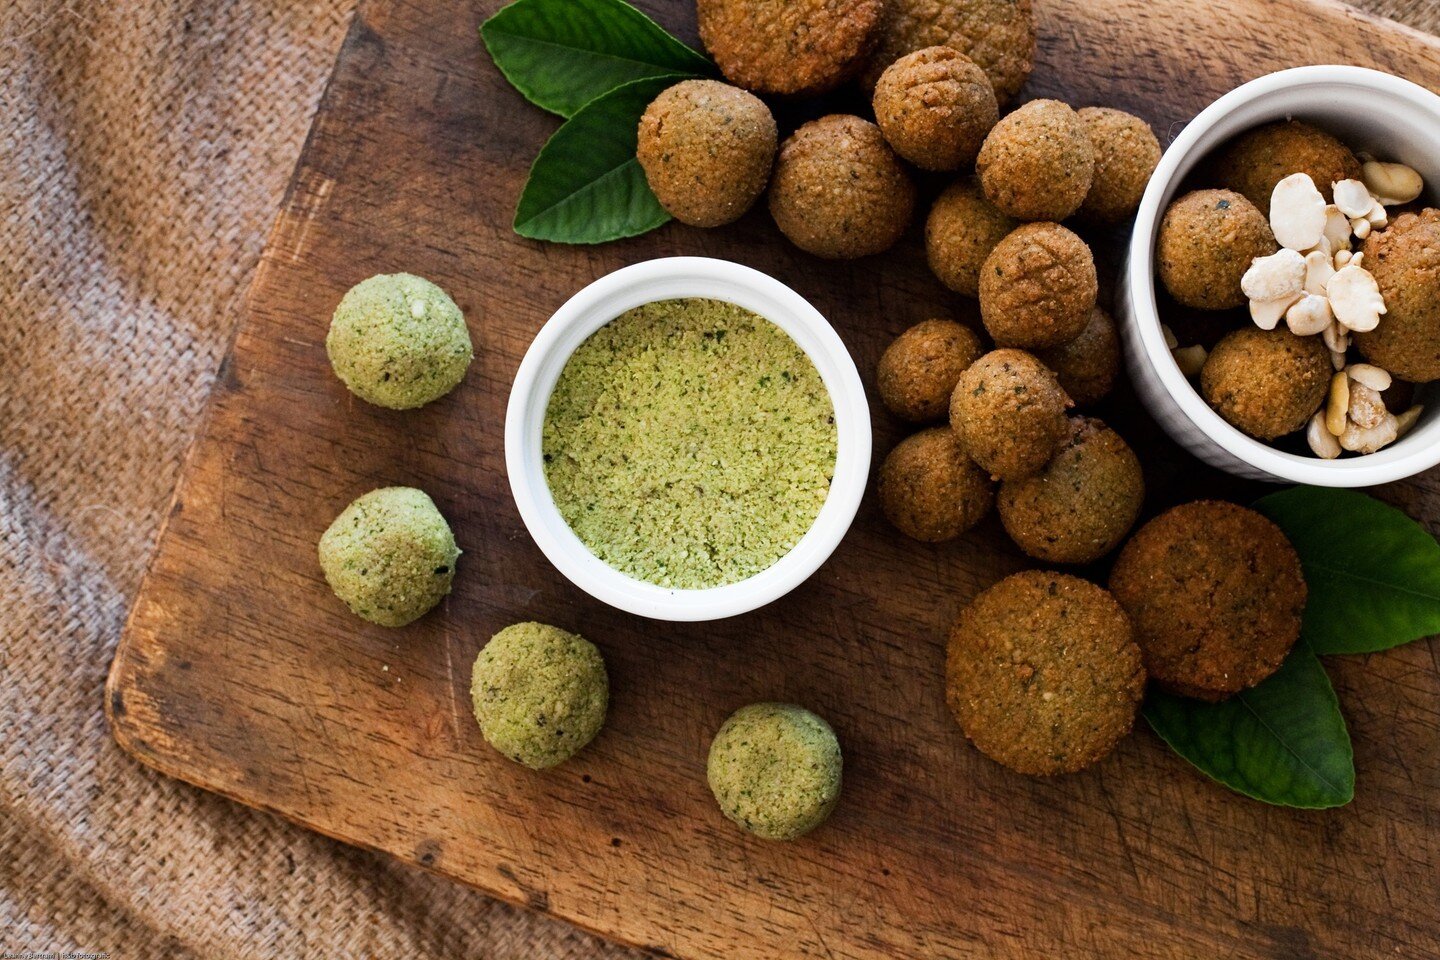 Have you been frightened off by dry, flavourless pre-made falafel balls?  Well, give Arabian Bites a try 💚⁠
⁠
Our falafel mix is handmade in Melbourne and uses 100% natural ingredients with no preservatives. Based on old family recipes for Middle-Ea